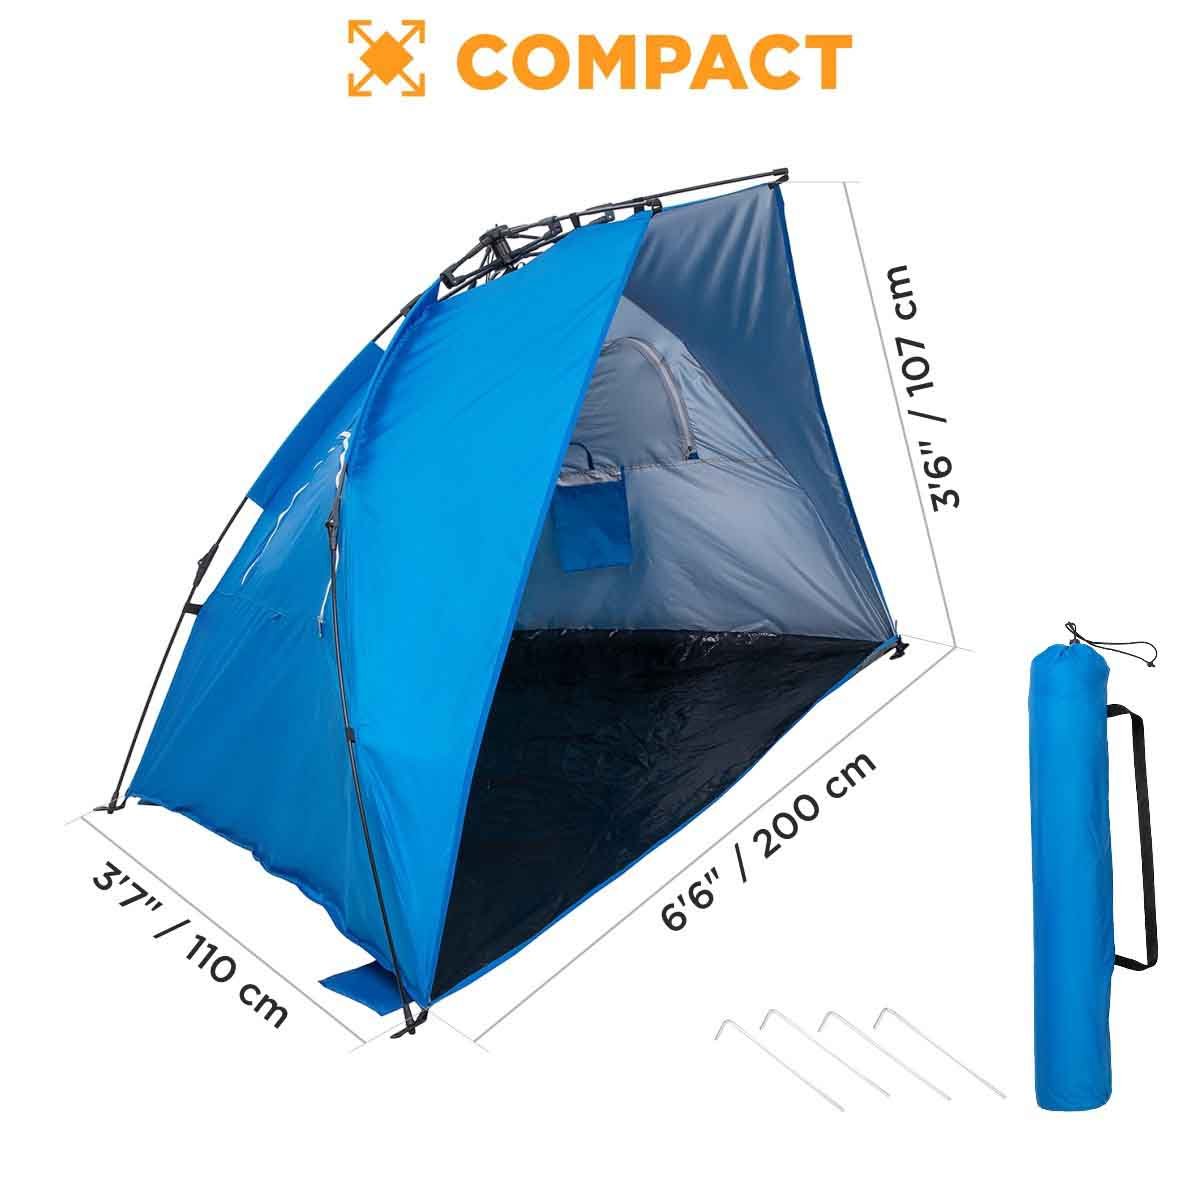 2 Person Easy Up Beach Tent Sun Shade Shelter is compactly sized - 6.6 feet wide, 3.7 feet long and 3.6 feet high.